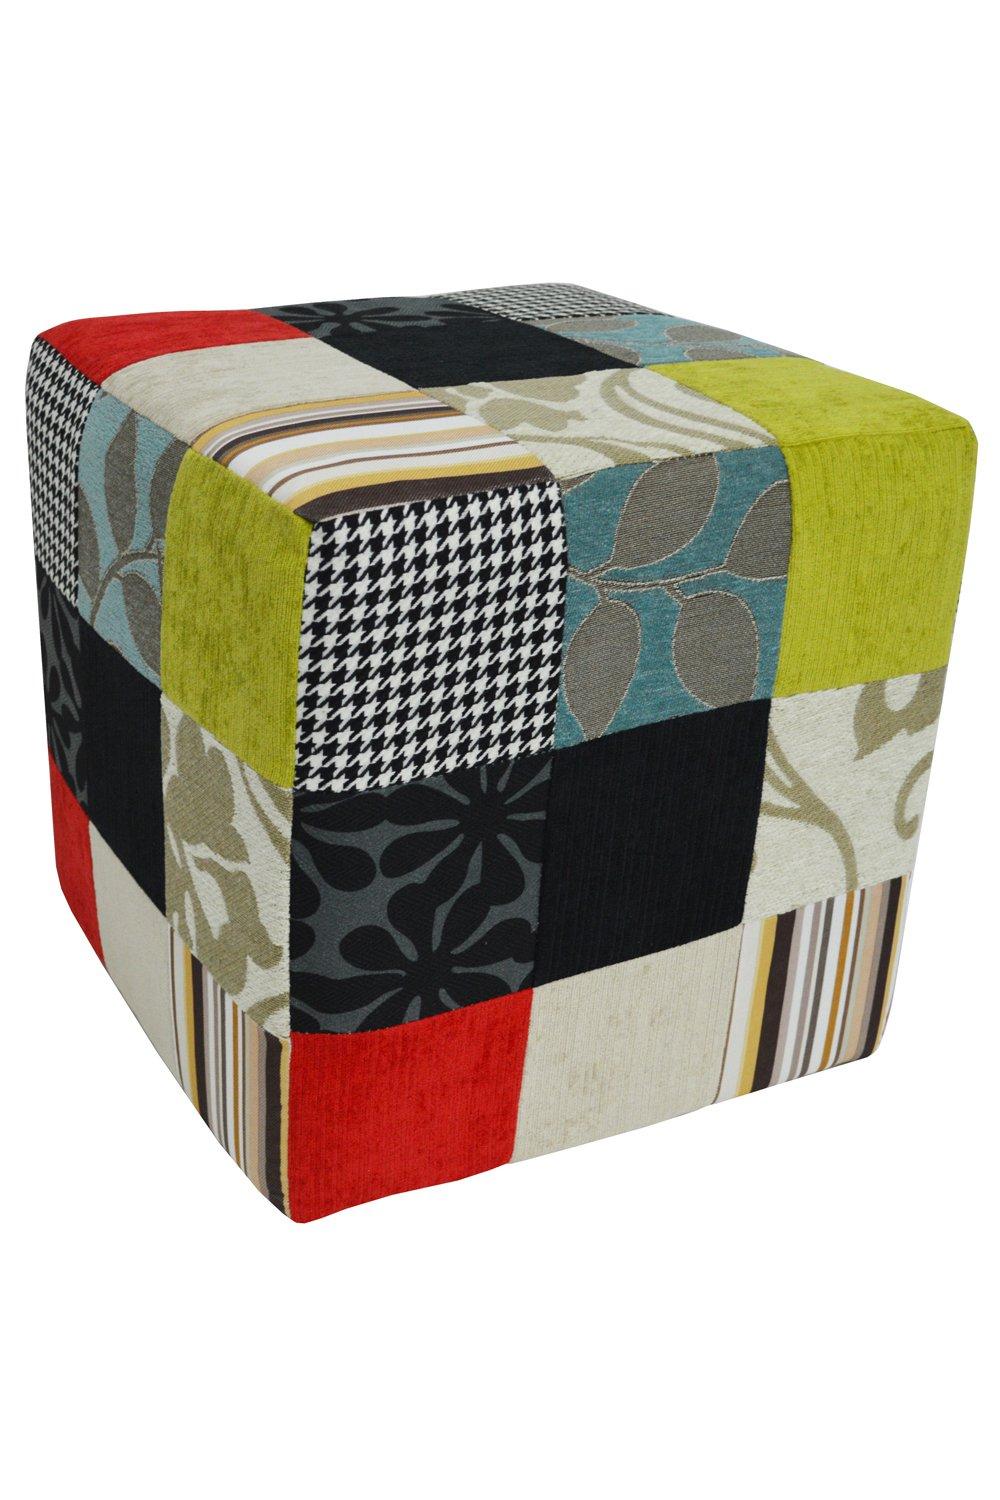 Plush Patchwork - Cube Stool  Pouffe - Blue  Green  Red